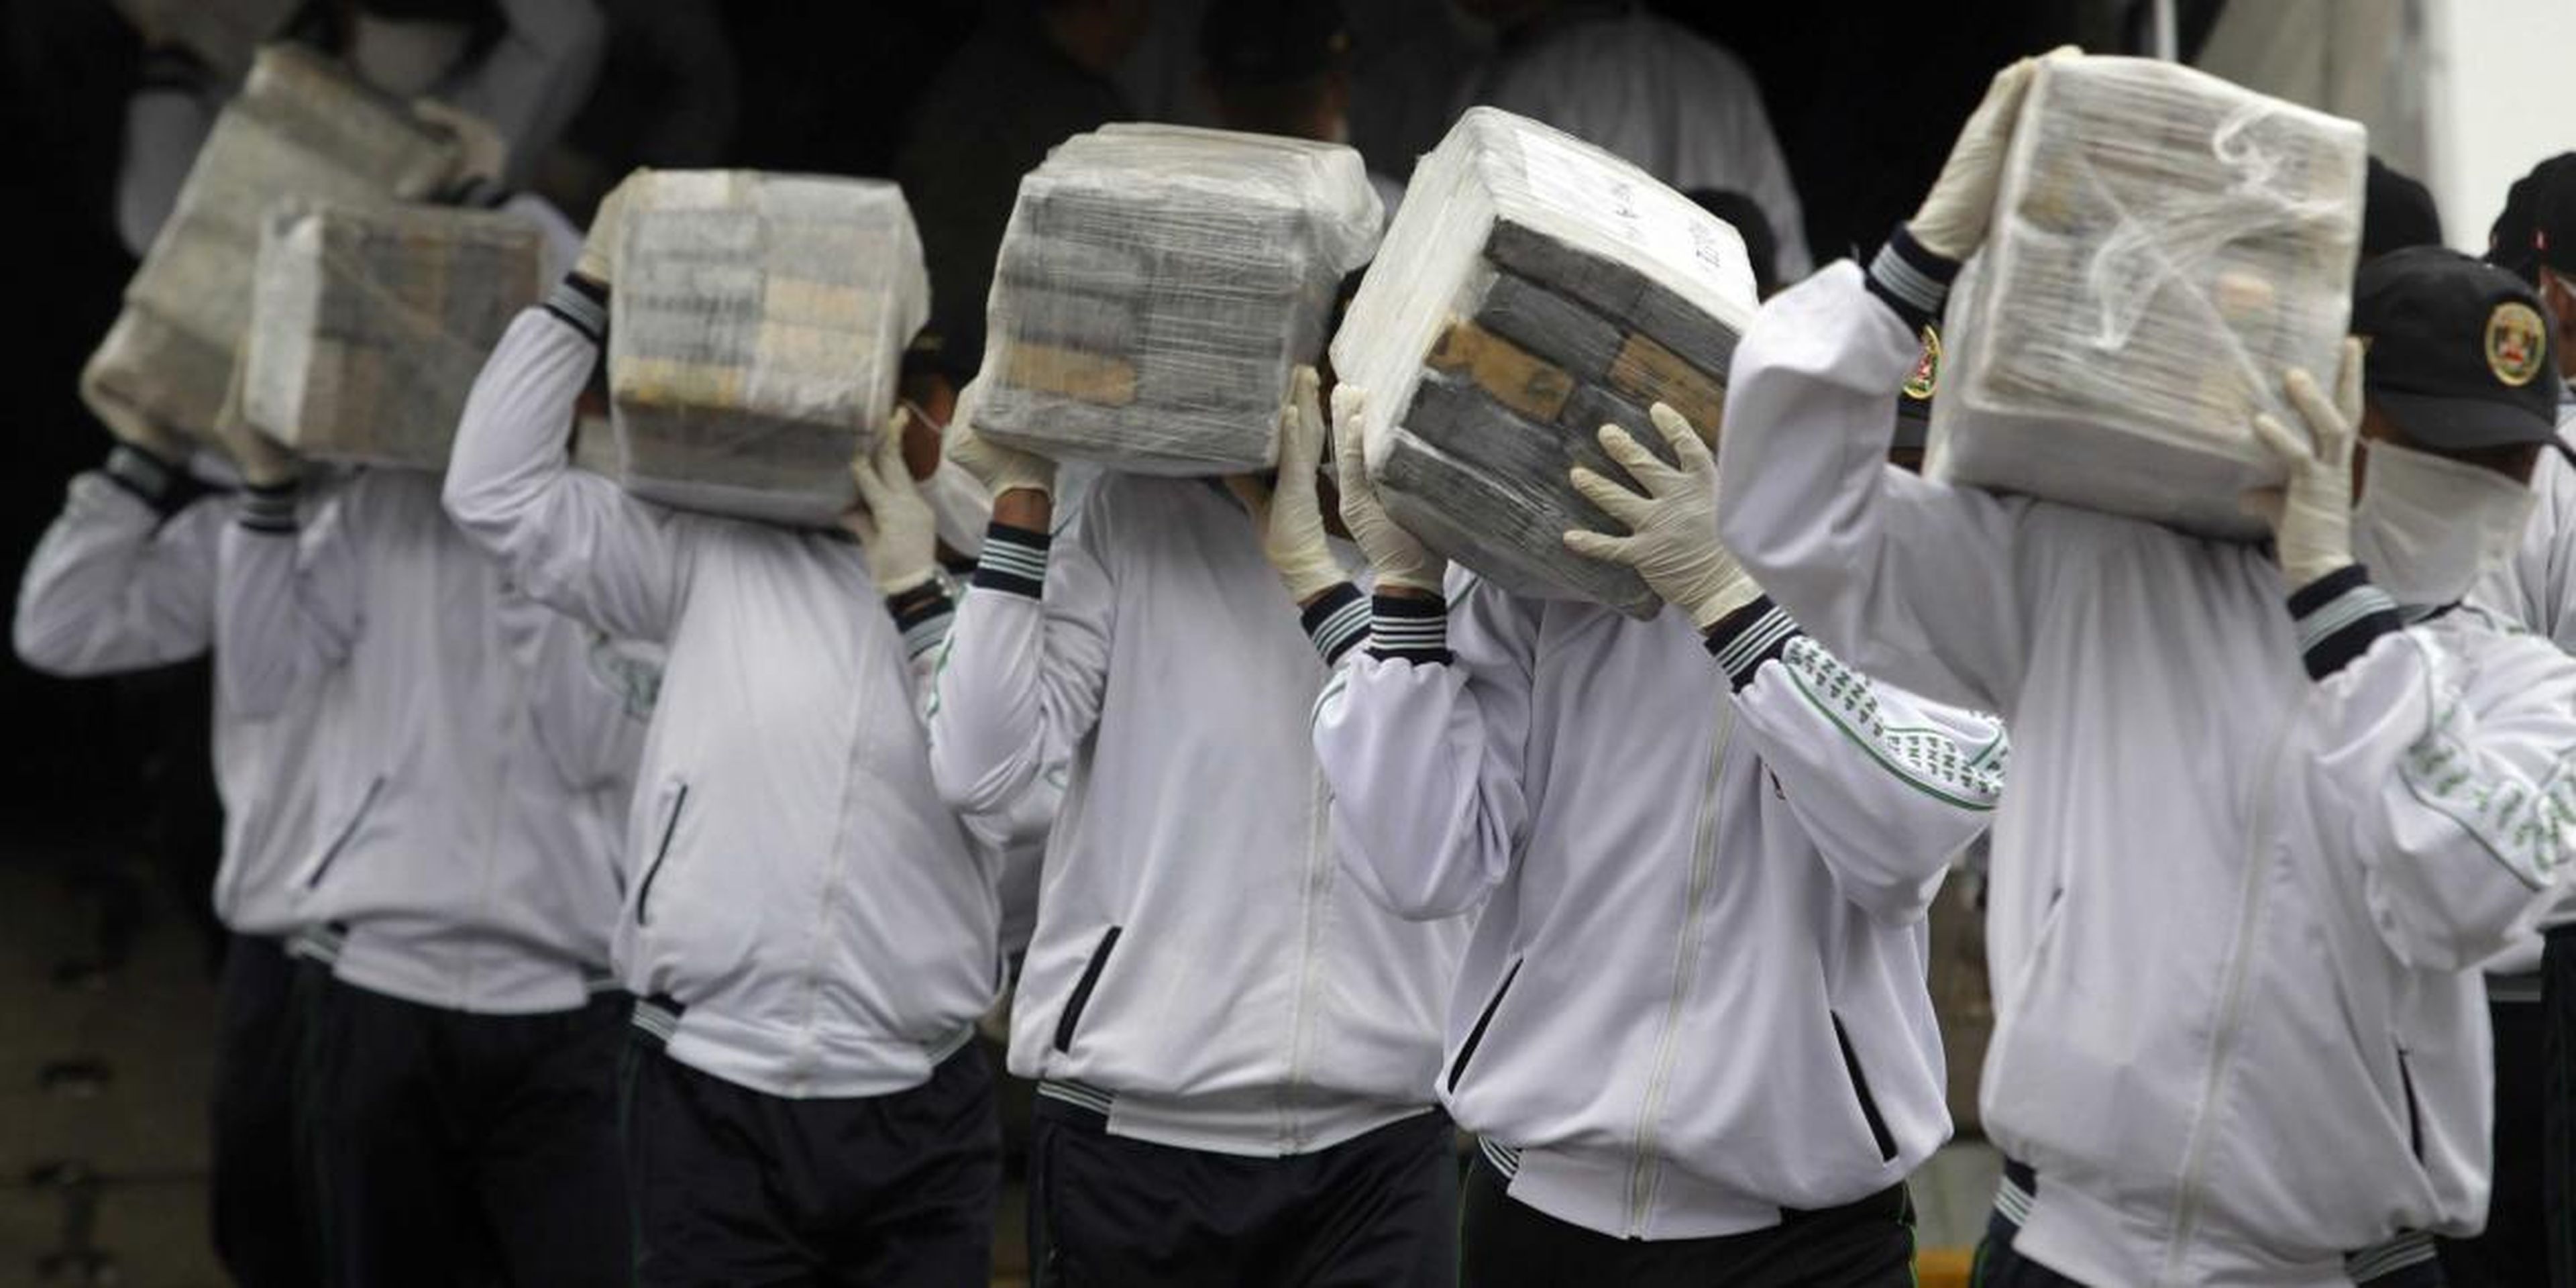 Police officers carry seized cocaine in Lima, Peru, in 2014. A large amount of Peruvian cocaine flowed through China between 2011 and 2015.